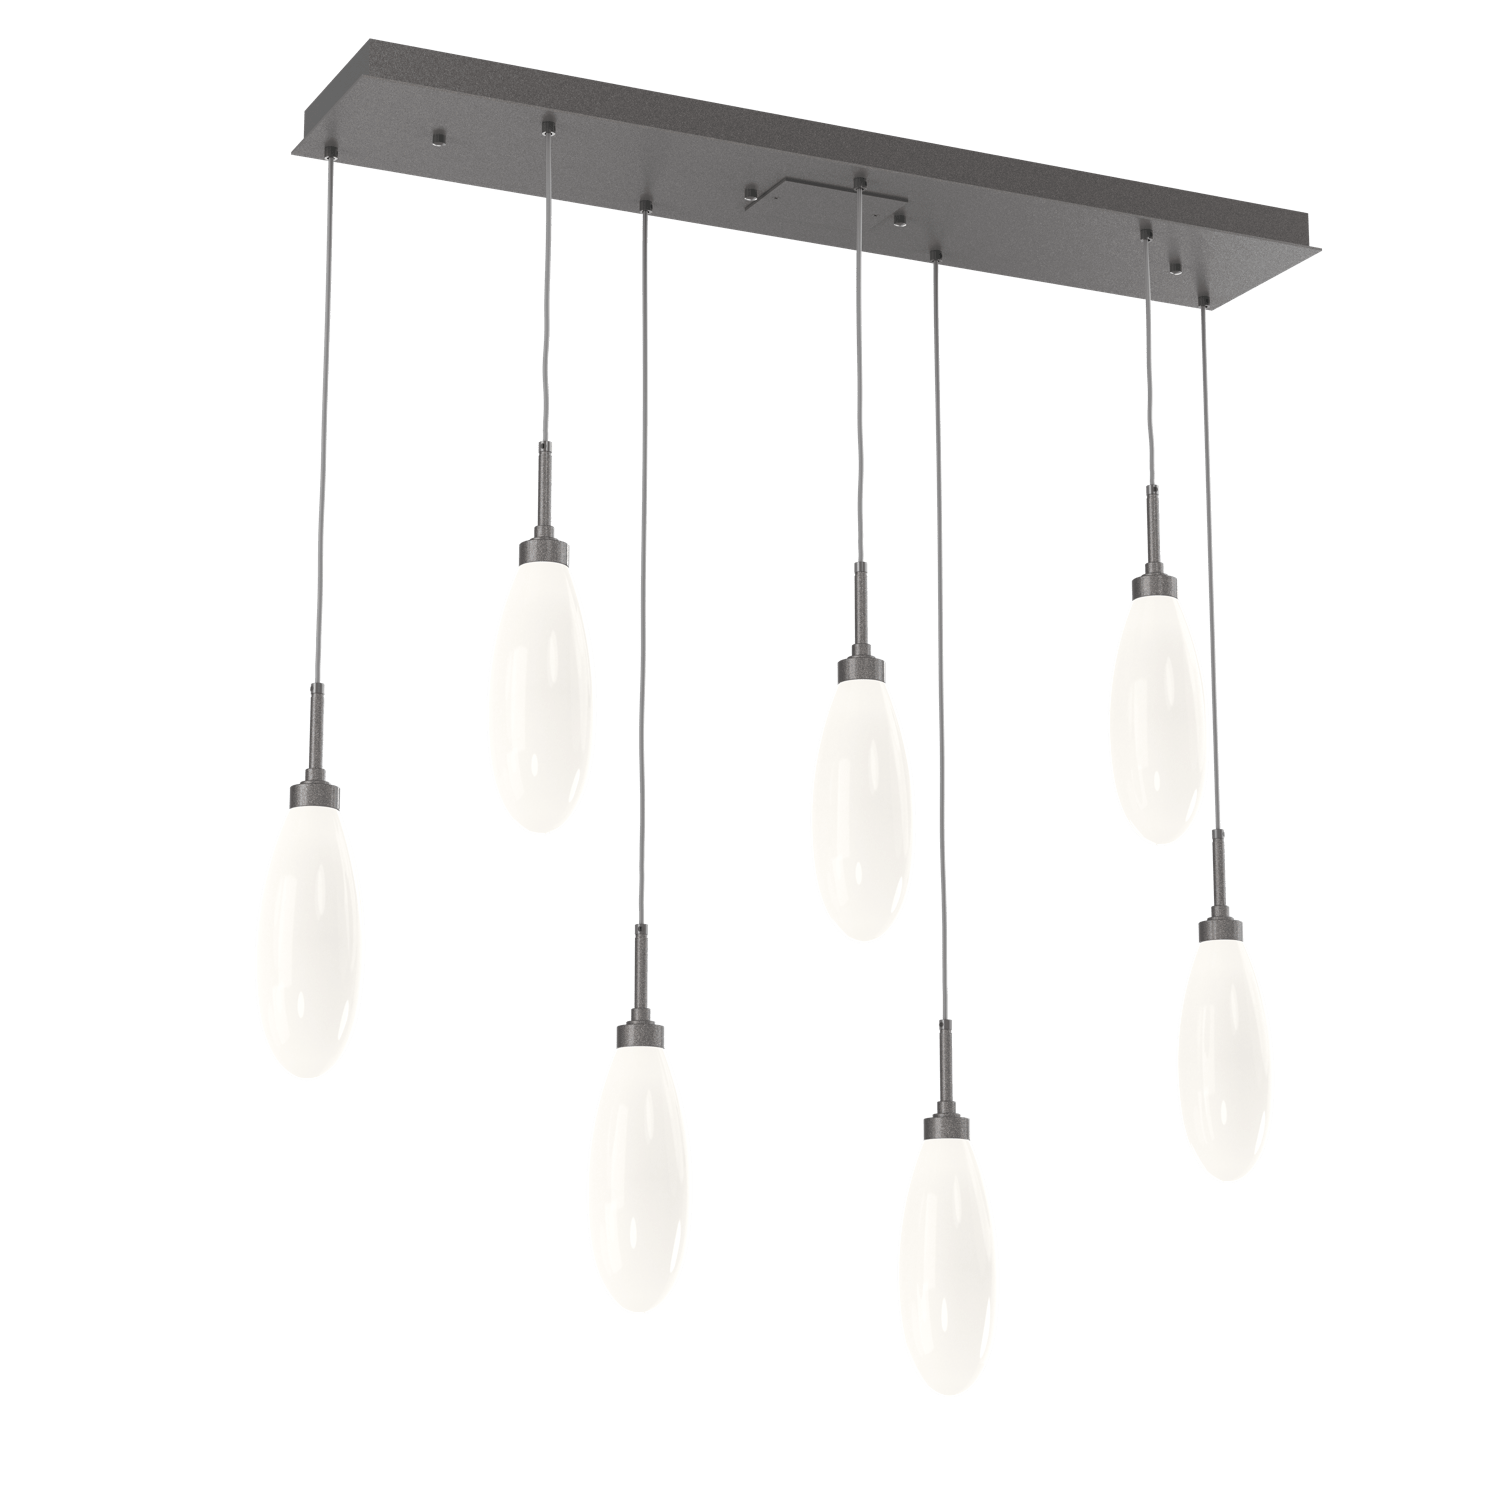 PLB0071-07-GP-WL-LL-Hammerton-Studio-Fiori-7-light-linear-pendant-chandelier-with-graphite-finish-and-opal-white-glass-shades-and-LED-lamping